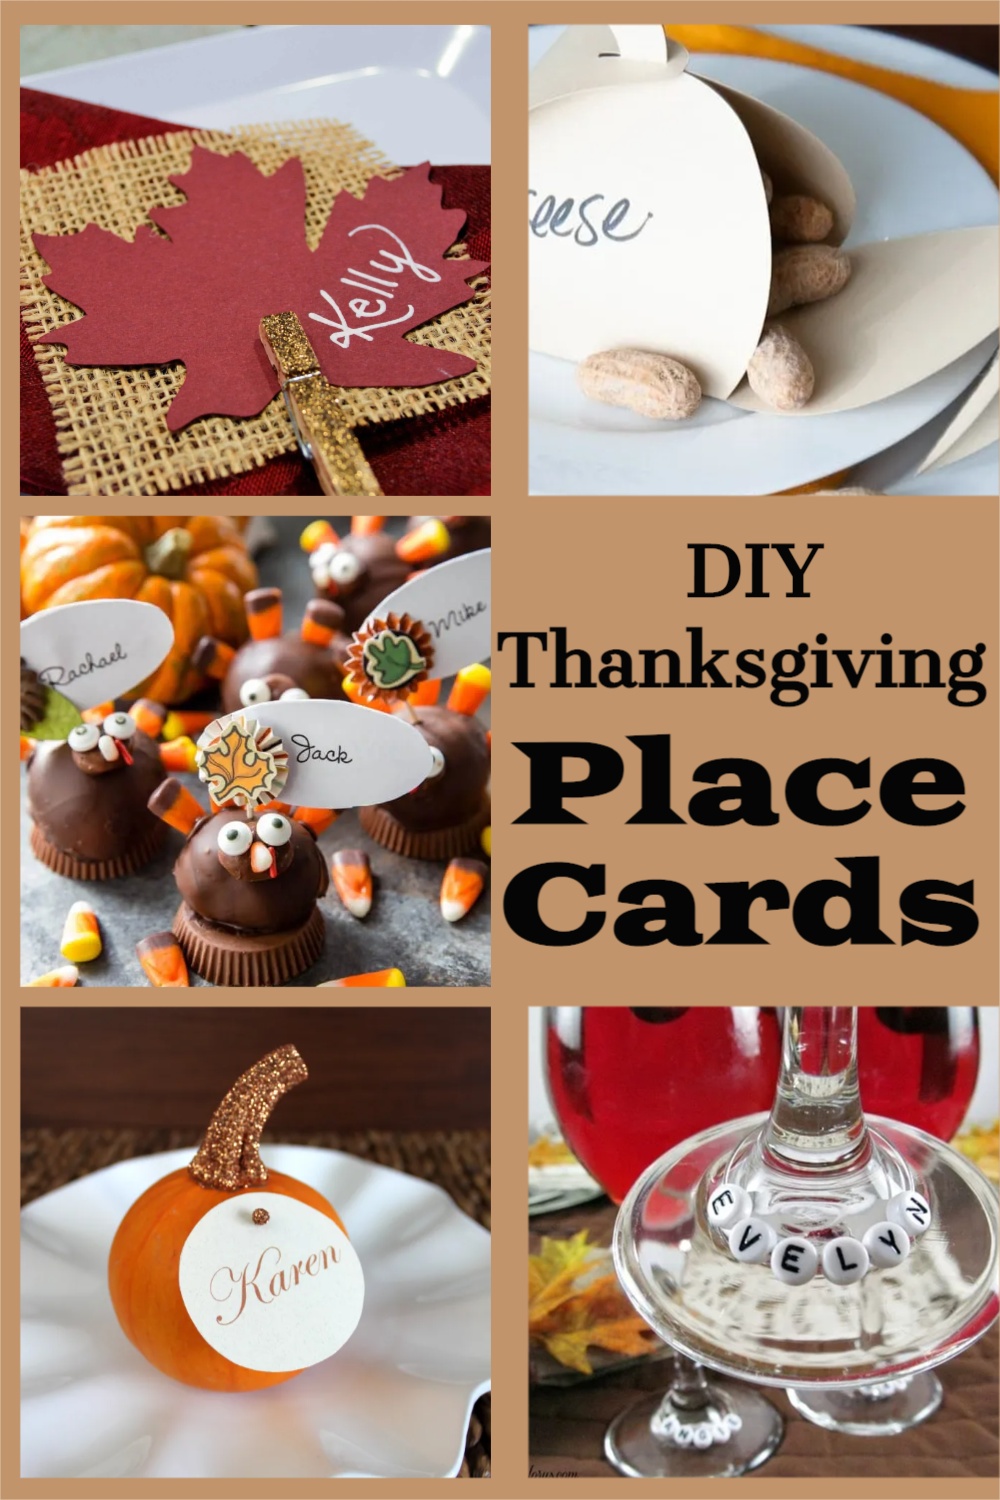 Make DIY table name cards or printable Thanksgiving place cards for your Thanksgiving Dinner table.  See these cute ideas for DIY place cards for Thanksgiving table favors for your guests. 